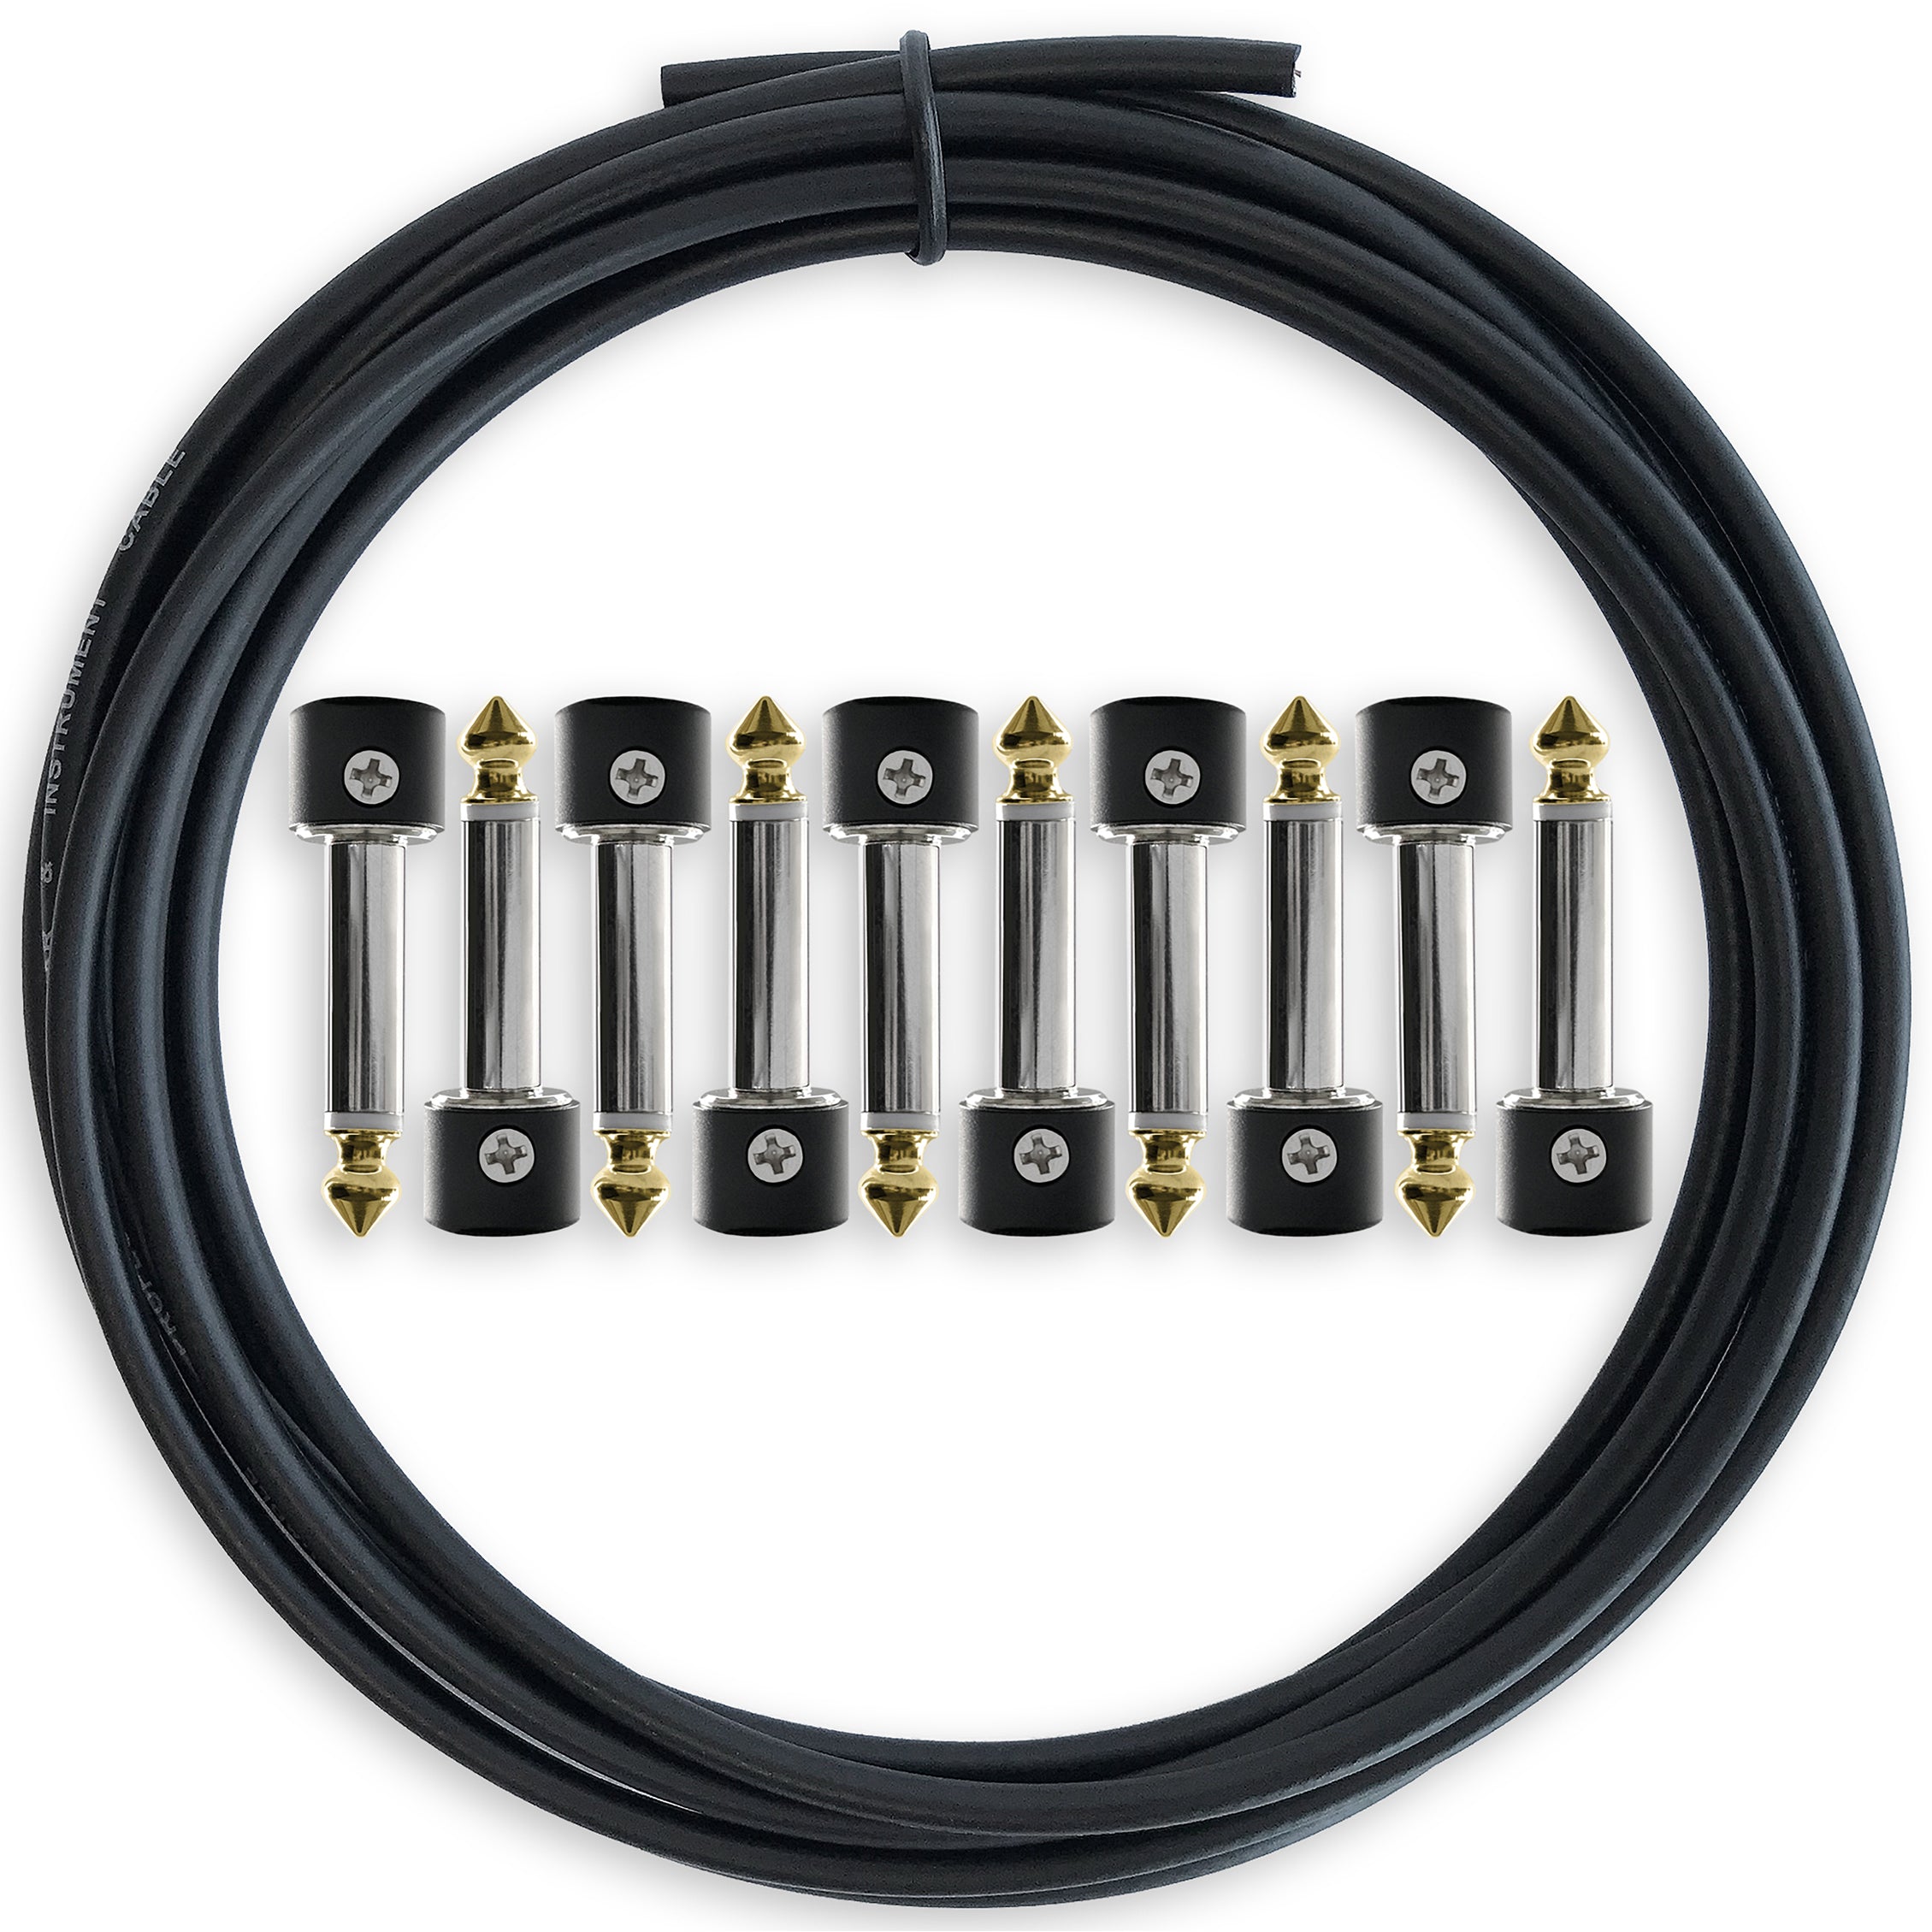 Crosby Solderless Pedalboard Cable Kit - Customize 5 Patch Cables